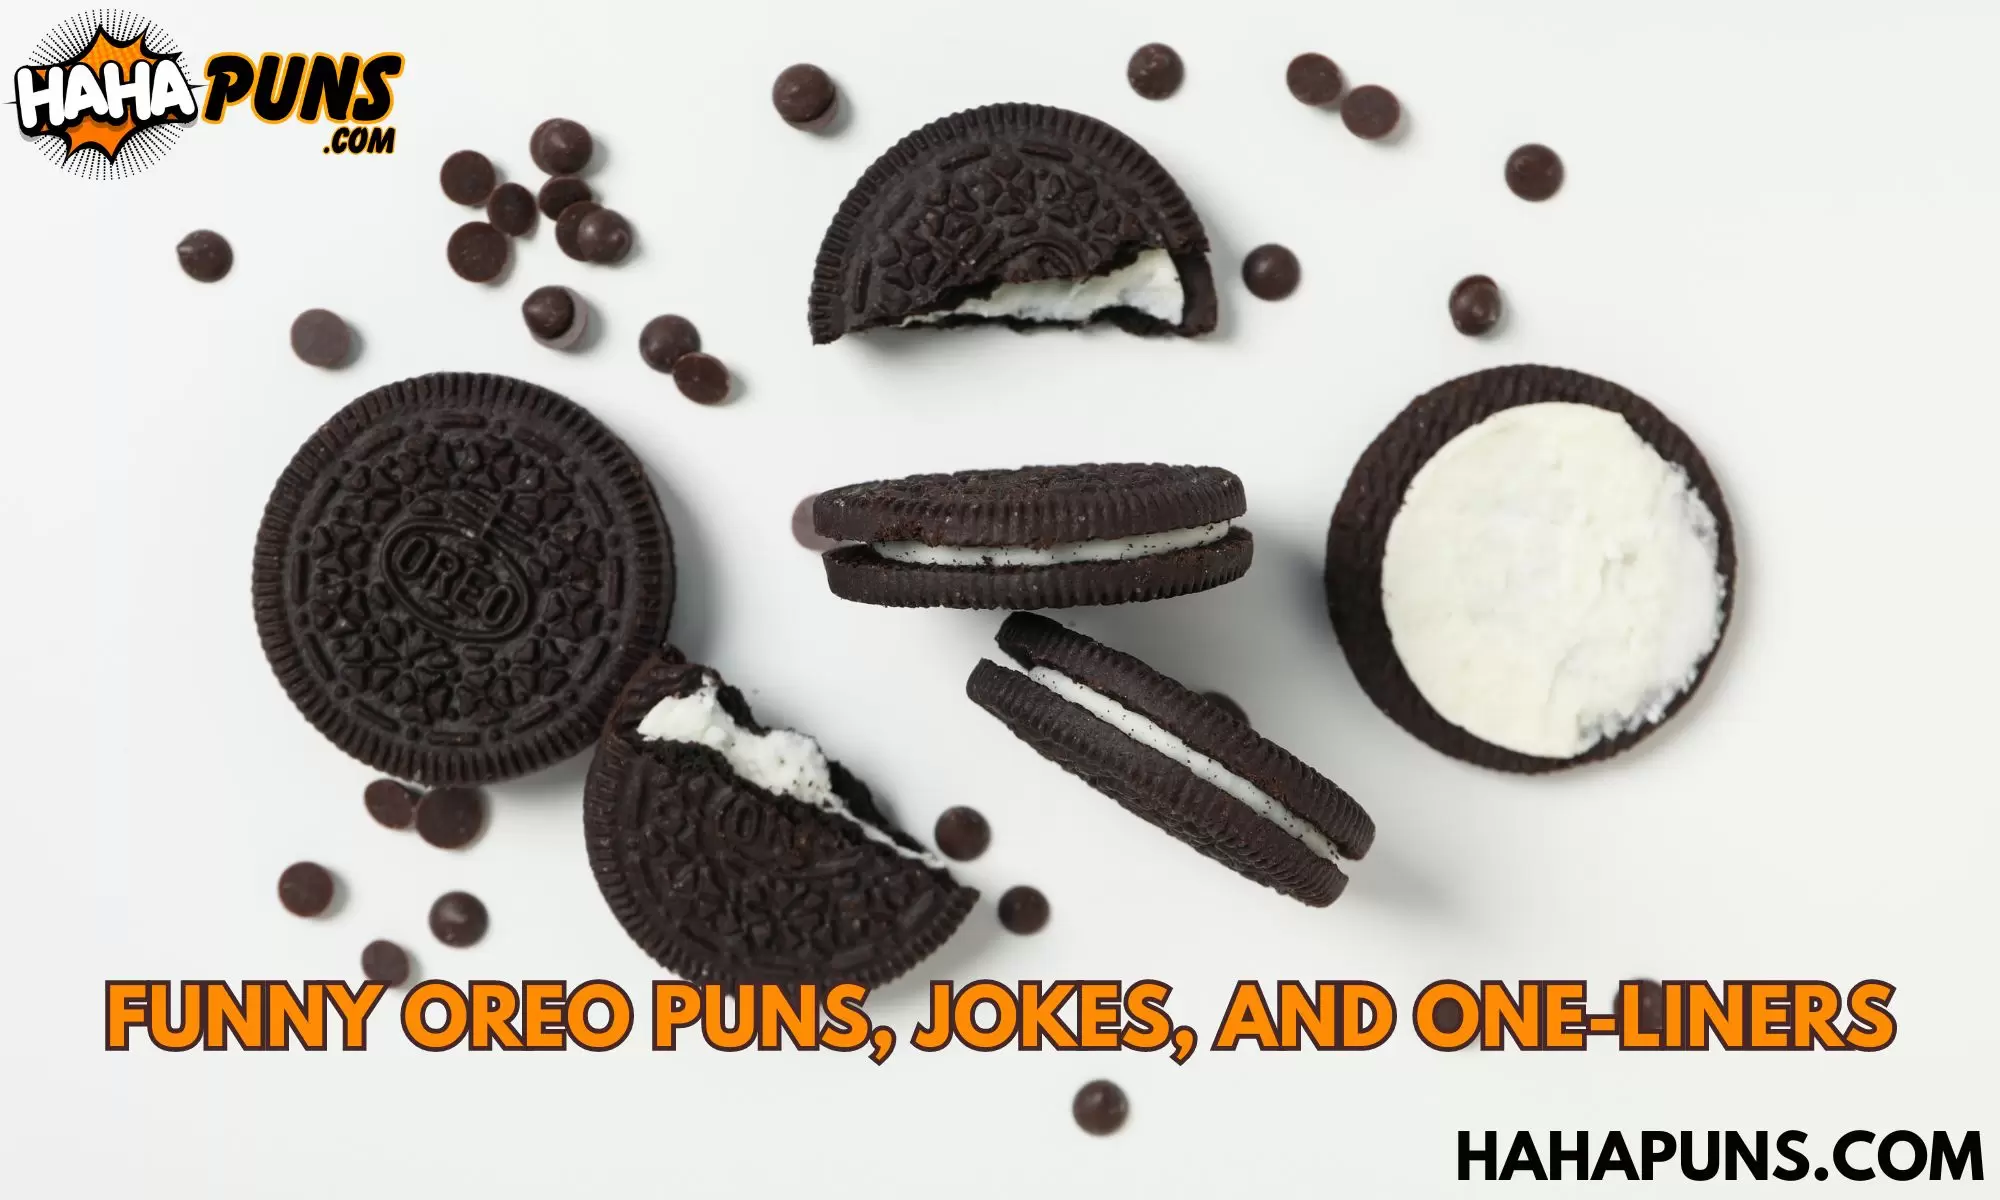 Funny Oreo Puns, Jokes, and One-Liners